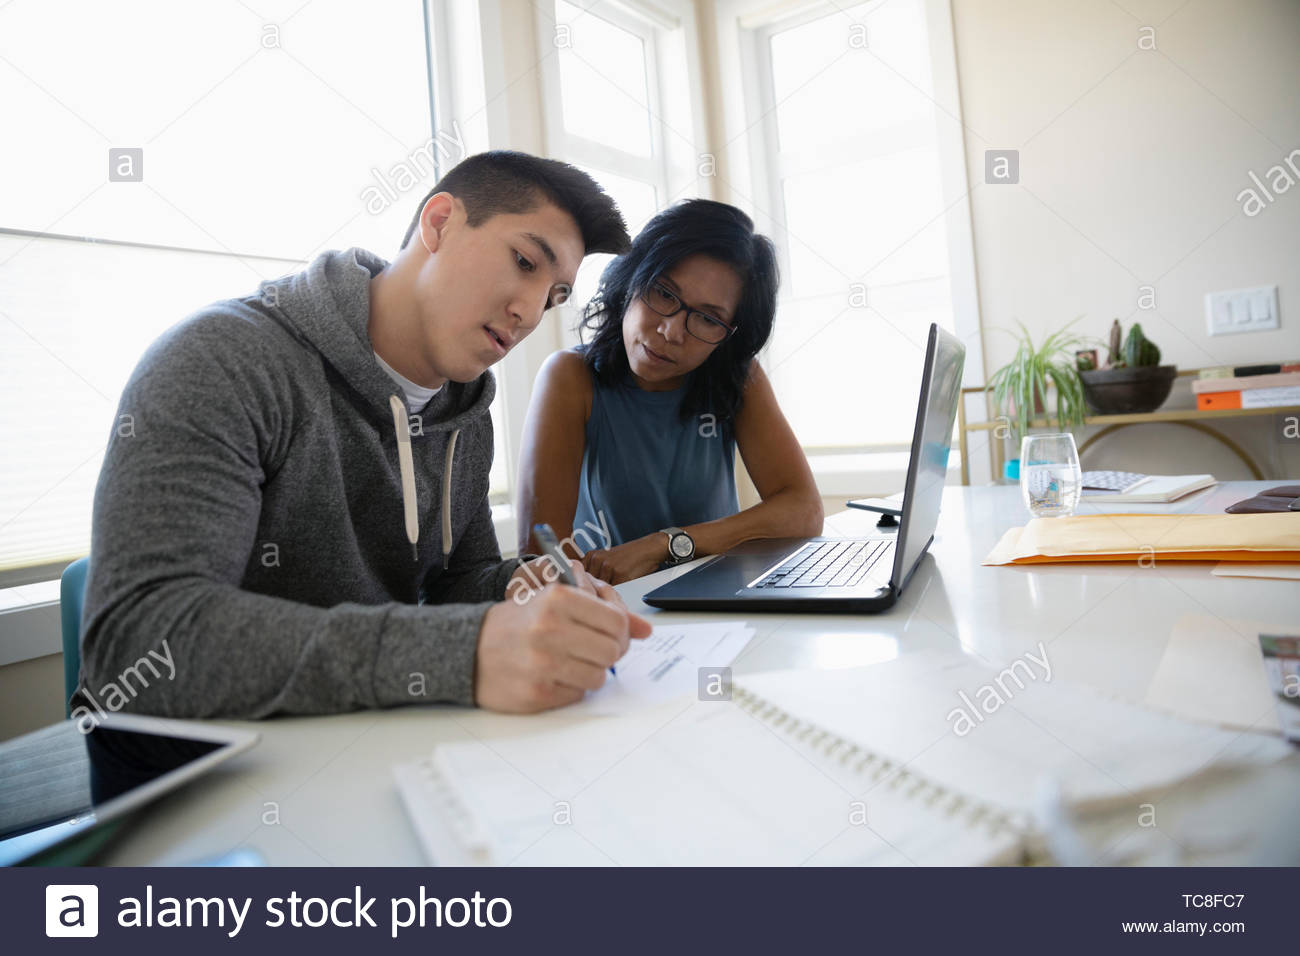 Mother helping teenage son fill out college application at table Stock Photo